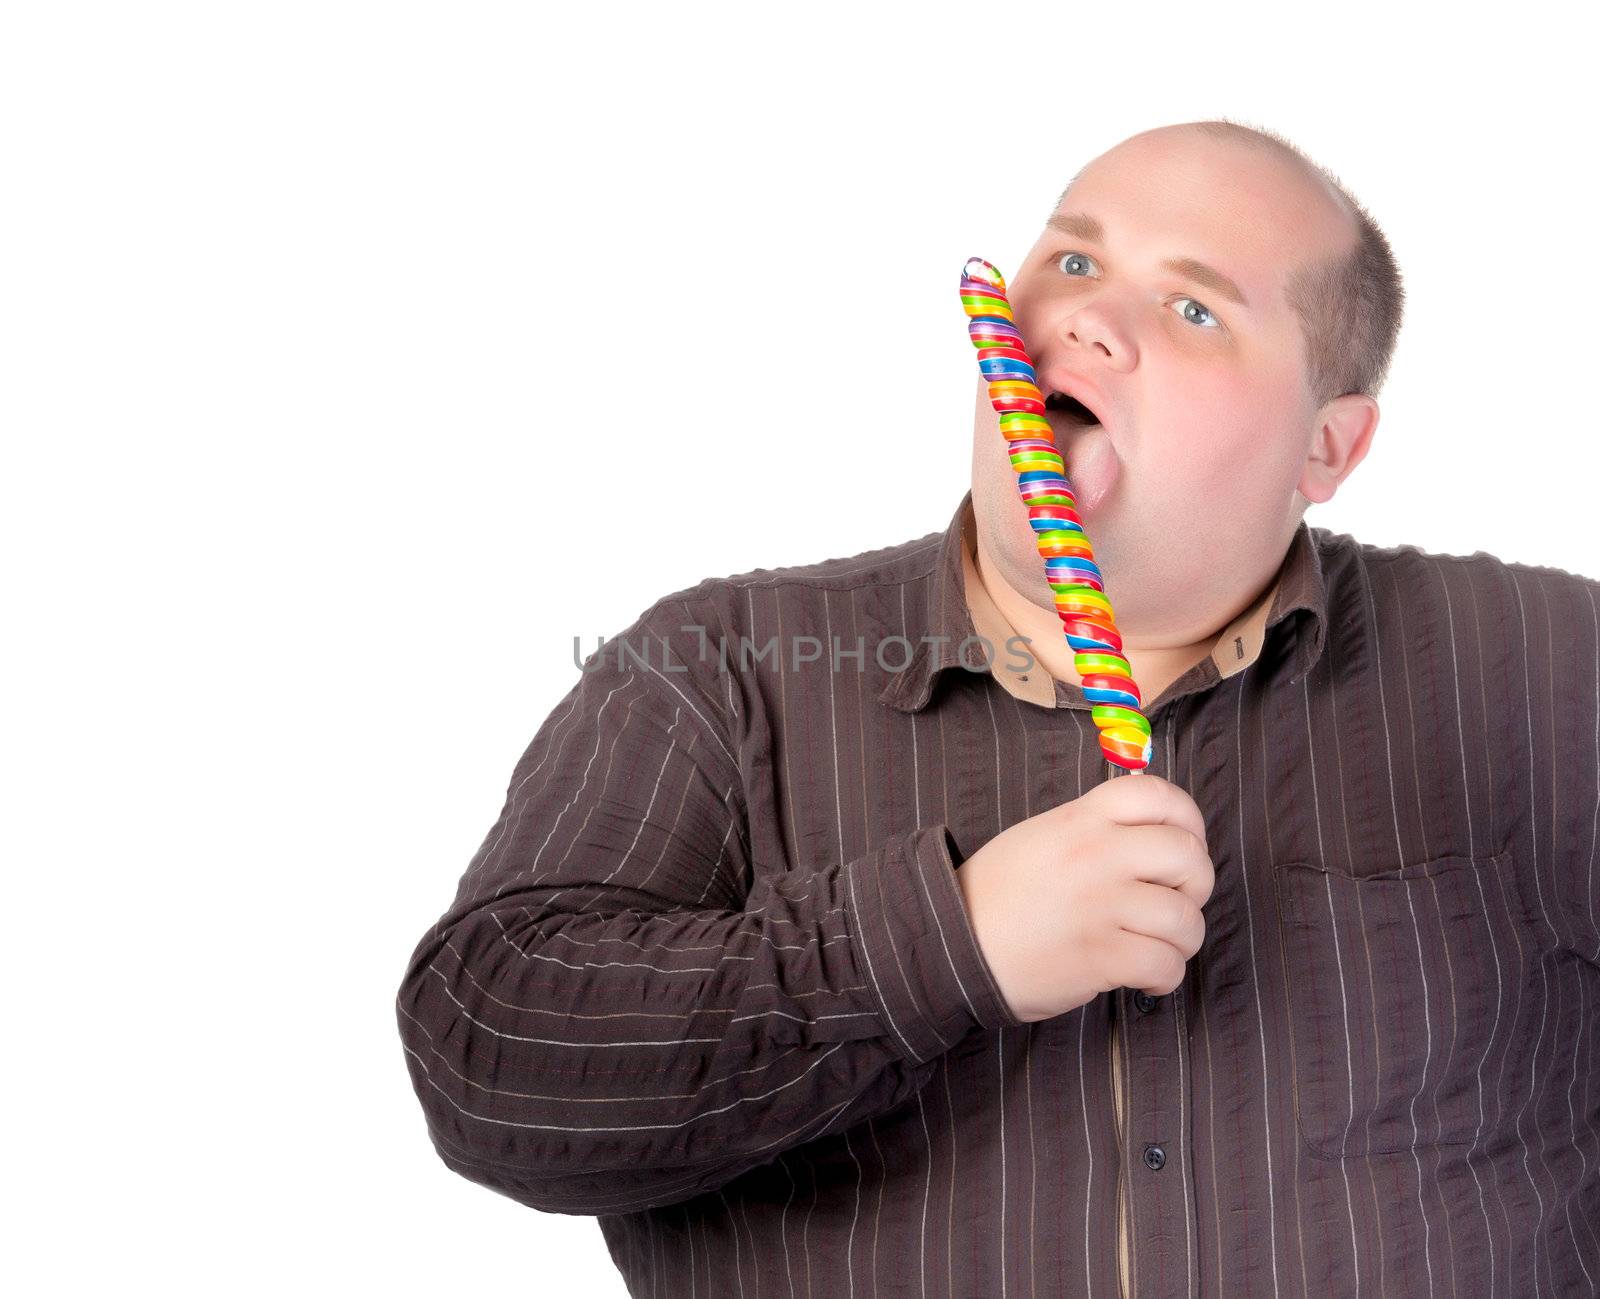 Fat obese man enjoying a a long colourful striped lollipop, standing licking it with a look of complete absorption totally oblivious to his surroundings